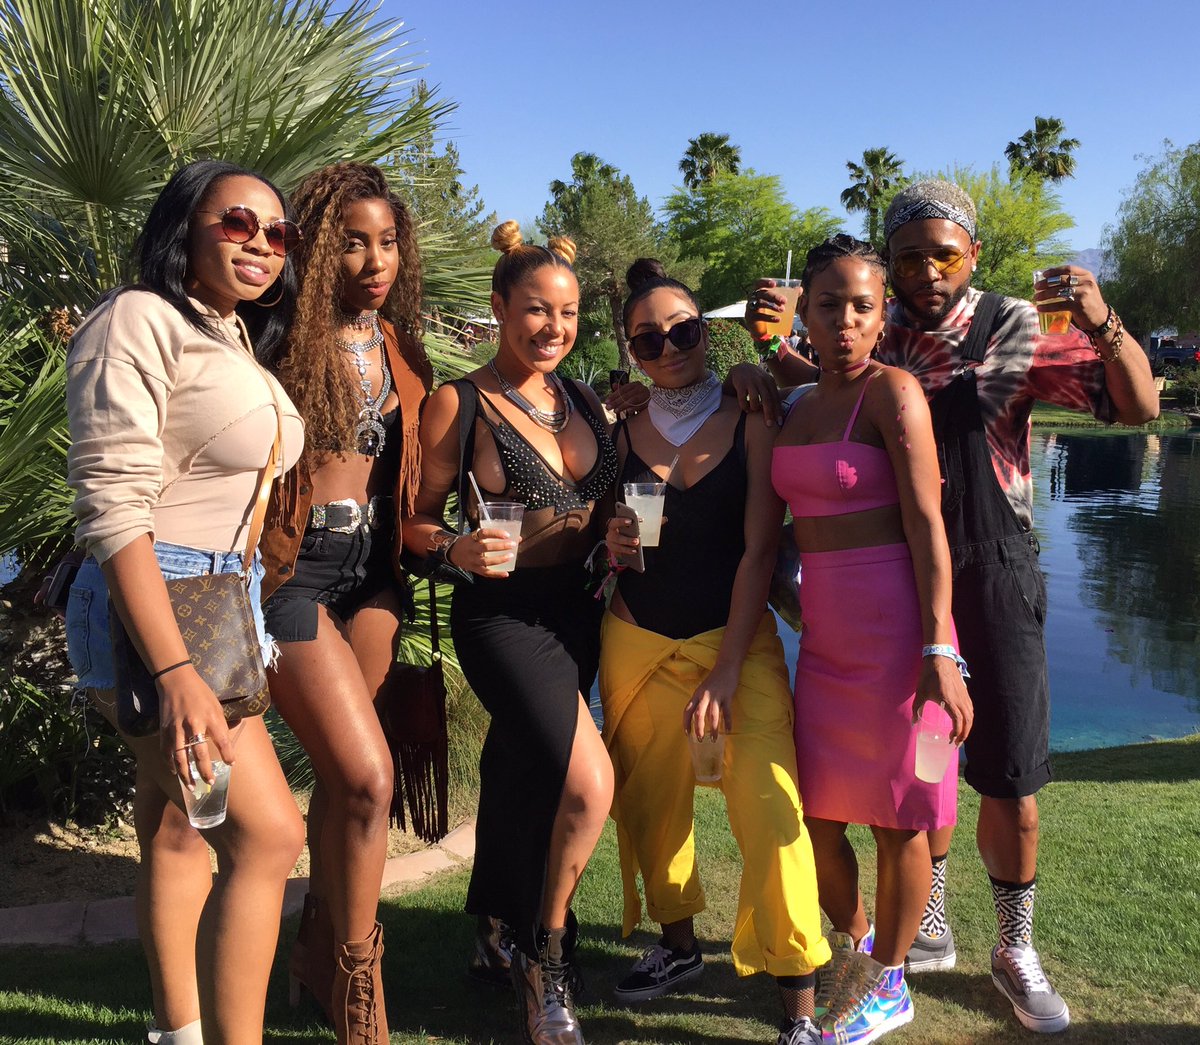 It's a wrap! #Coachella was a blast thanks to these beauties! Till next time! https://t.co/R6qLehPFst